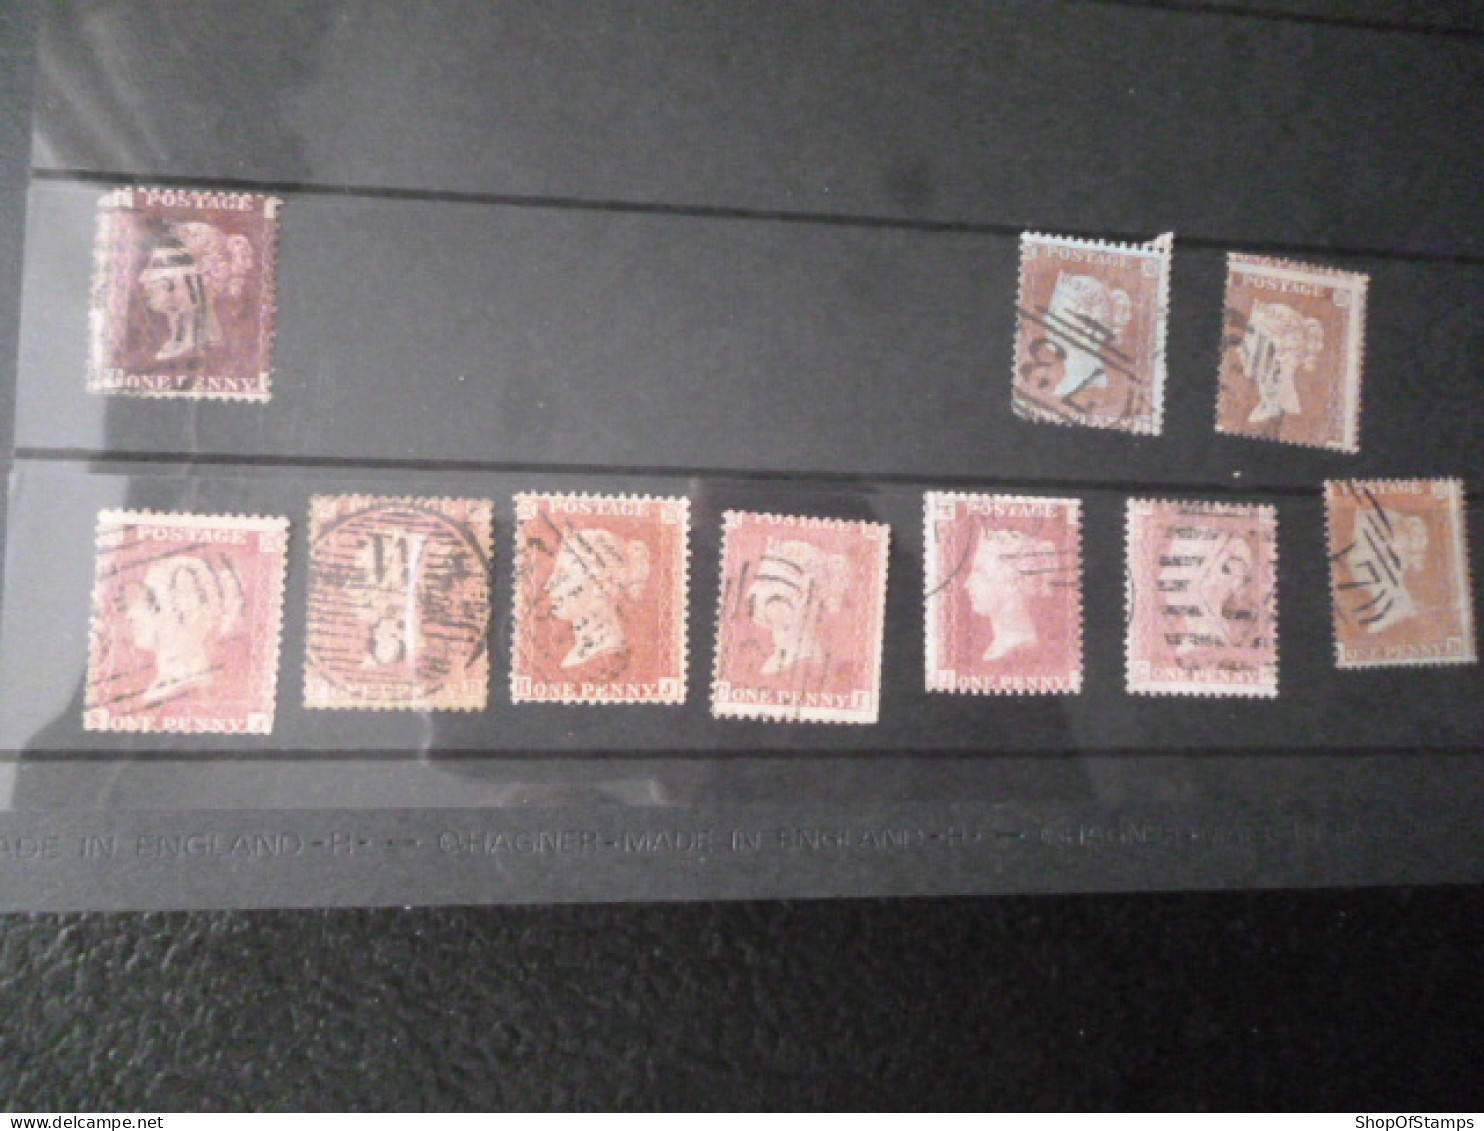 GREAT BRITAIN SG RED PENNY IMPERF Only 1 STAMP [ SELECT ONE AND MENTION ROW AND Stamp L To R] - ....-1951 Pre-Elizabeth II